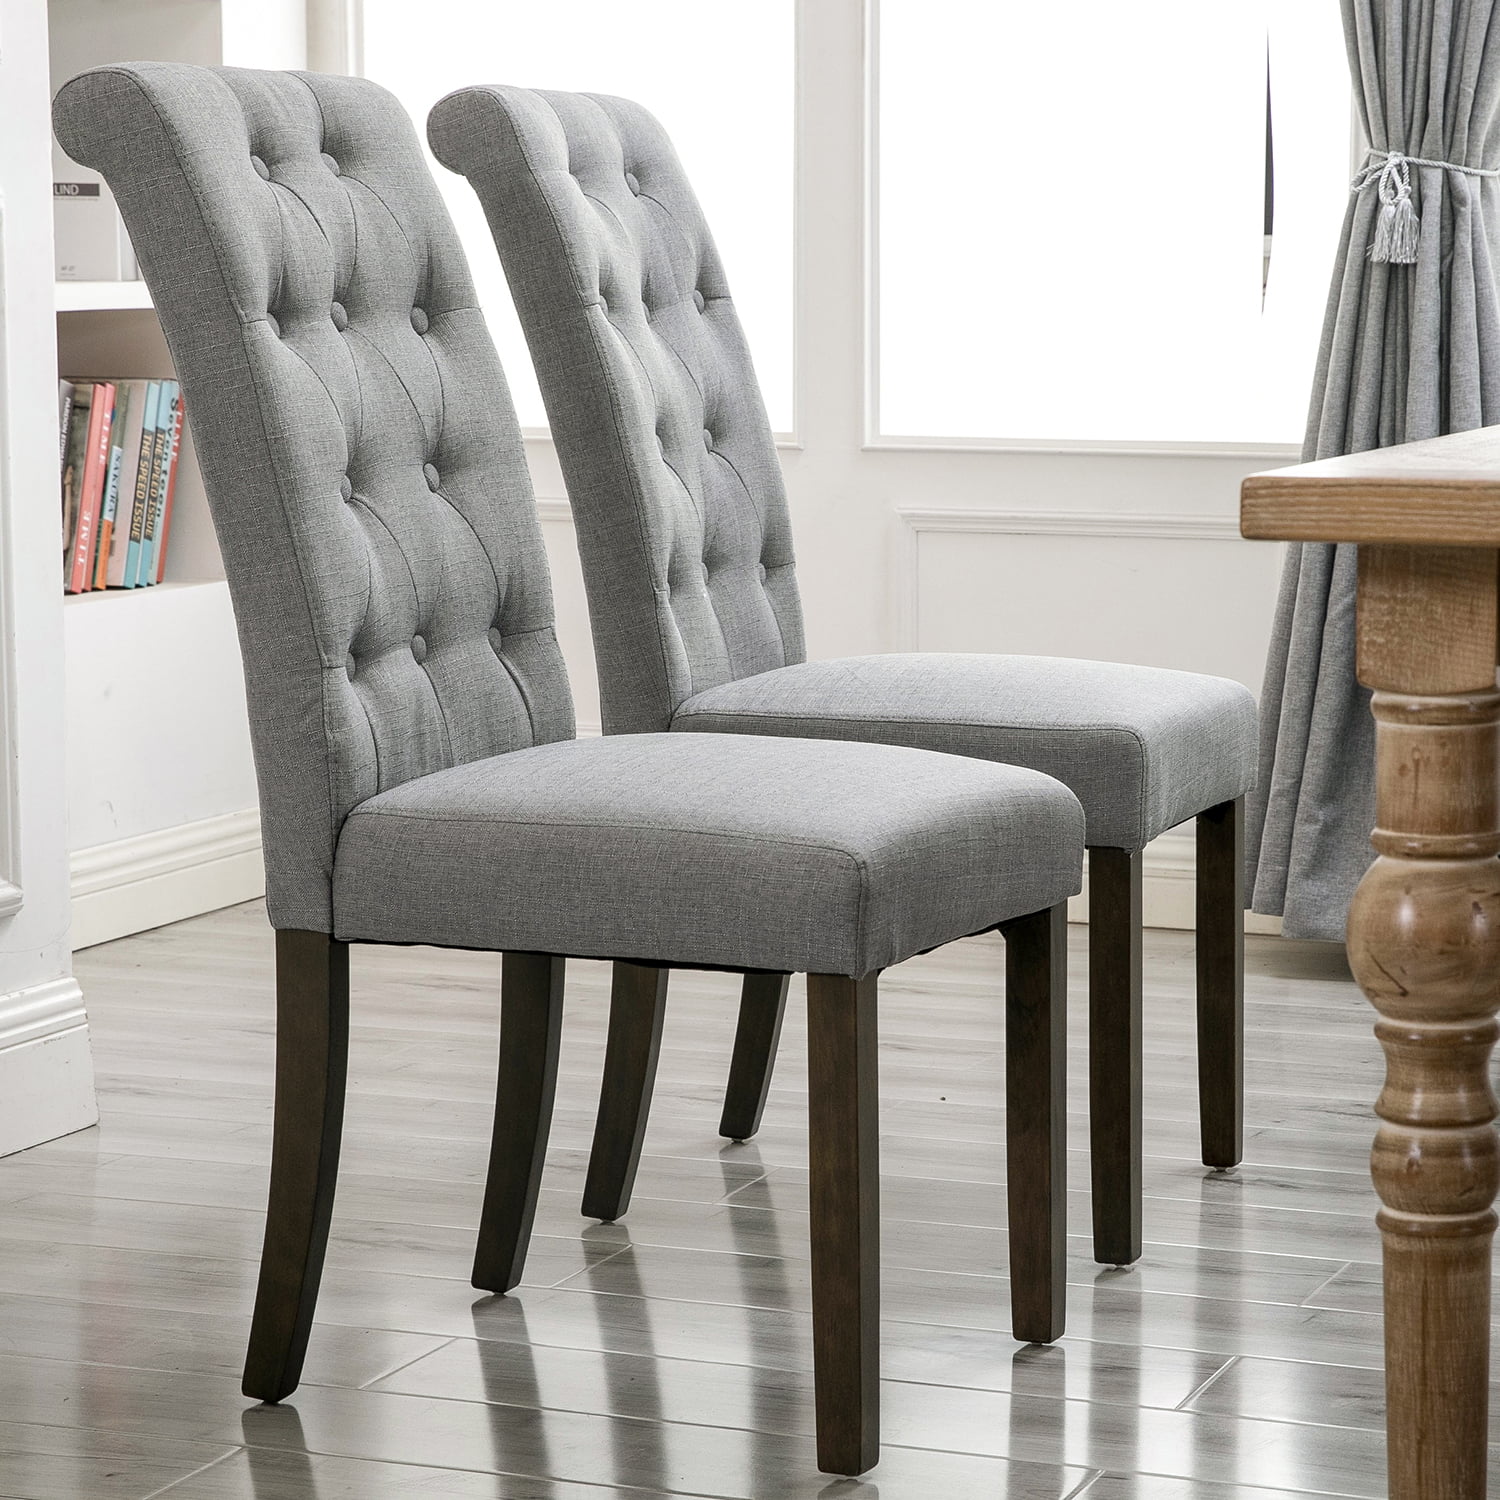 CLEARANCE! Set of 2 Tufted Dining Chairs, 39.8"x22.4"x17.5" Upholstered